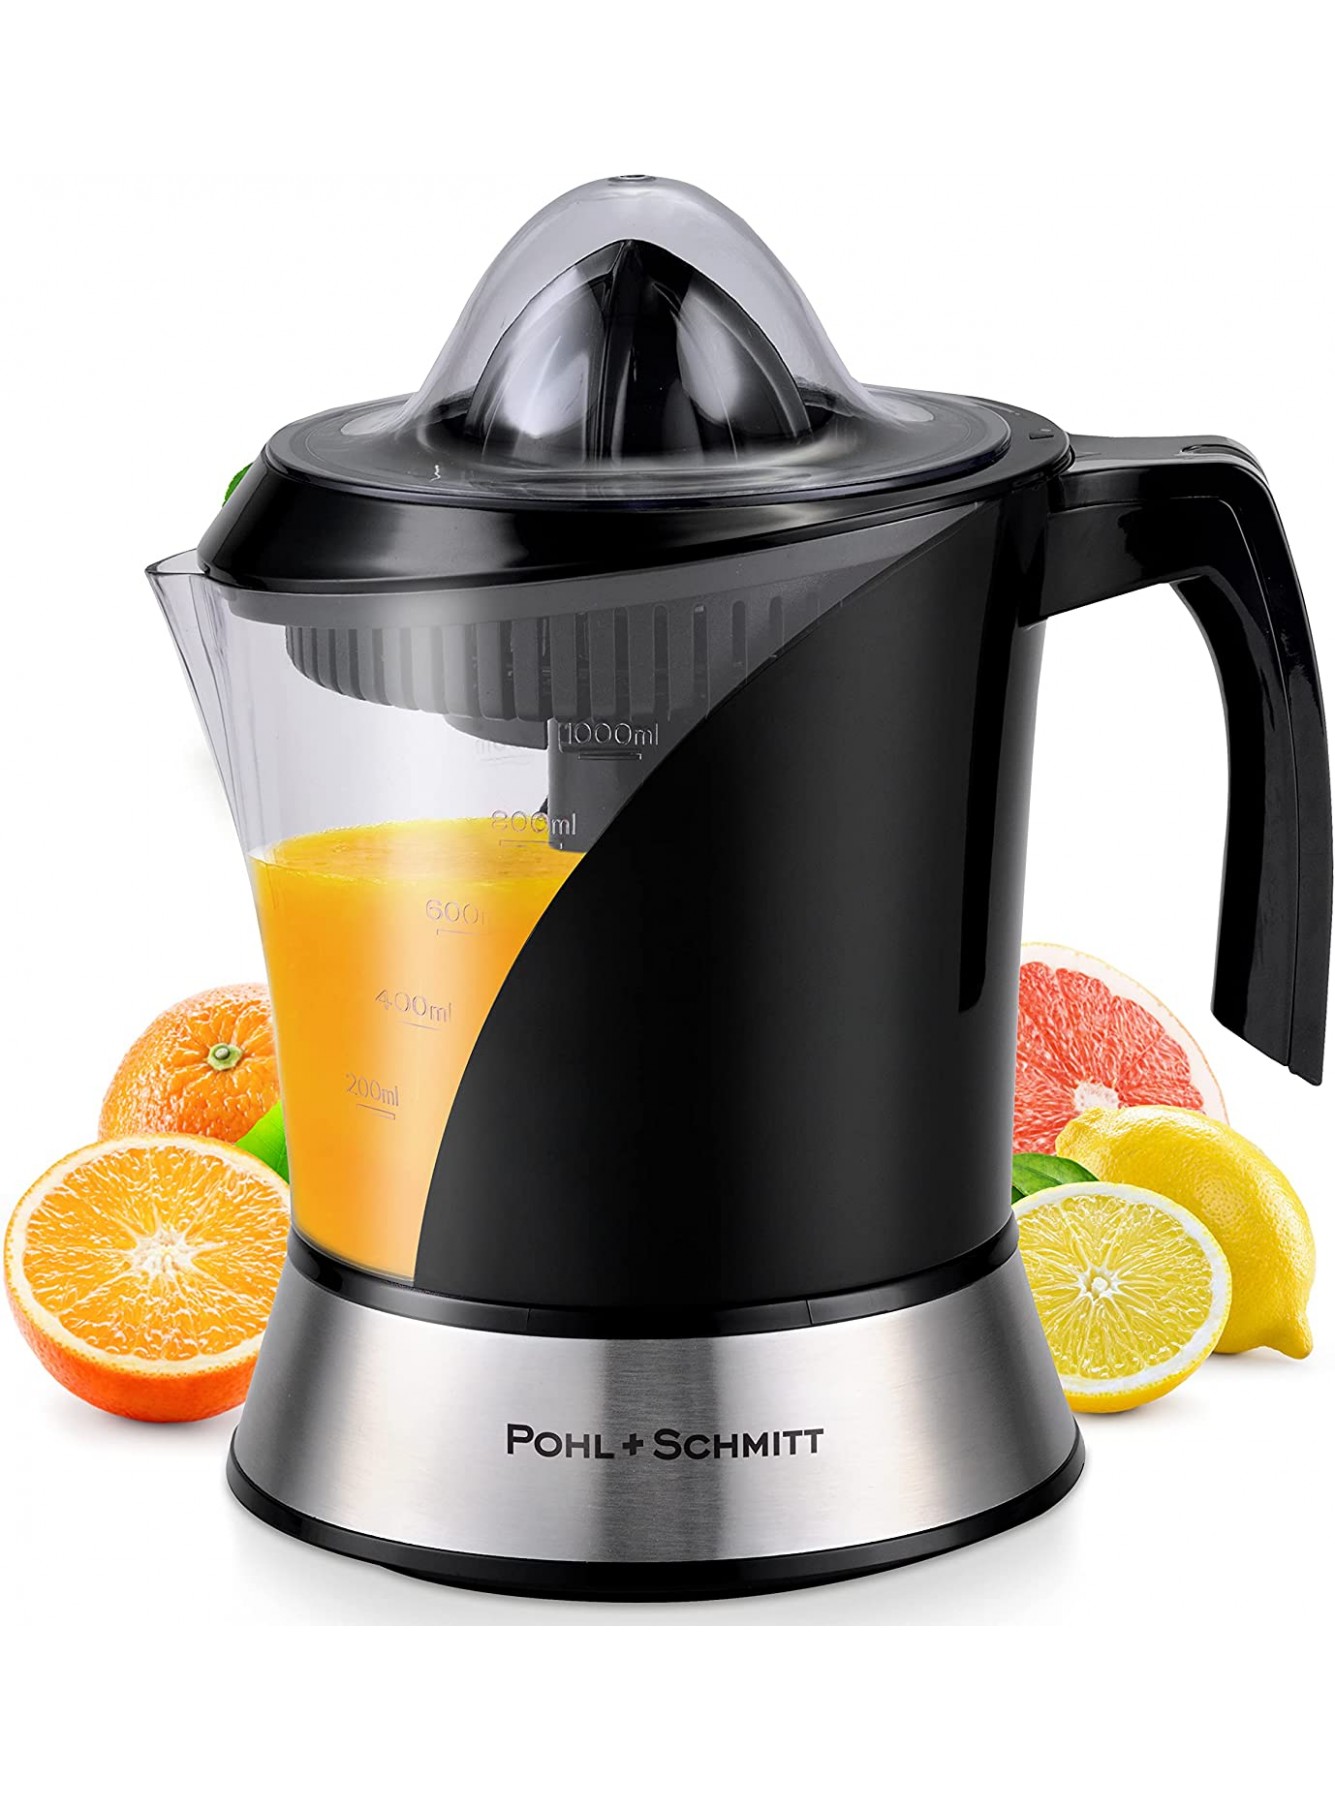 Pohl+Schmitt Deco-Line Electric Citrus Juicer Machine Extractor Large Capacity 34oz 1L Easy-Clean Featuring Pulp Control Technology B07PXMKMRS